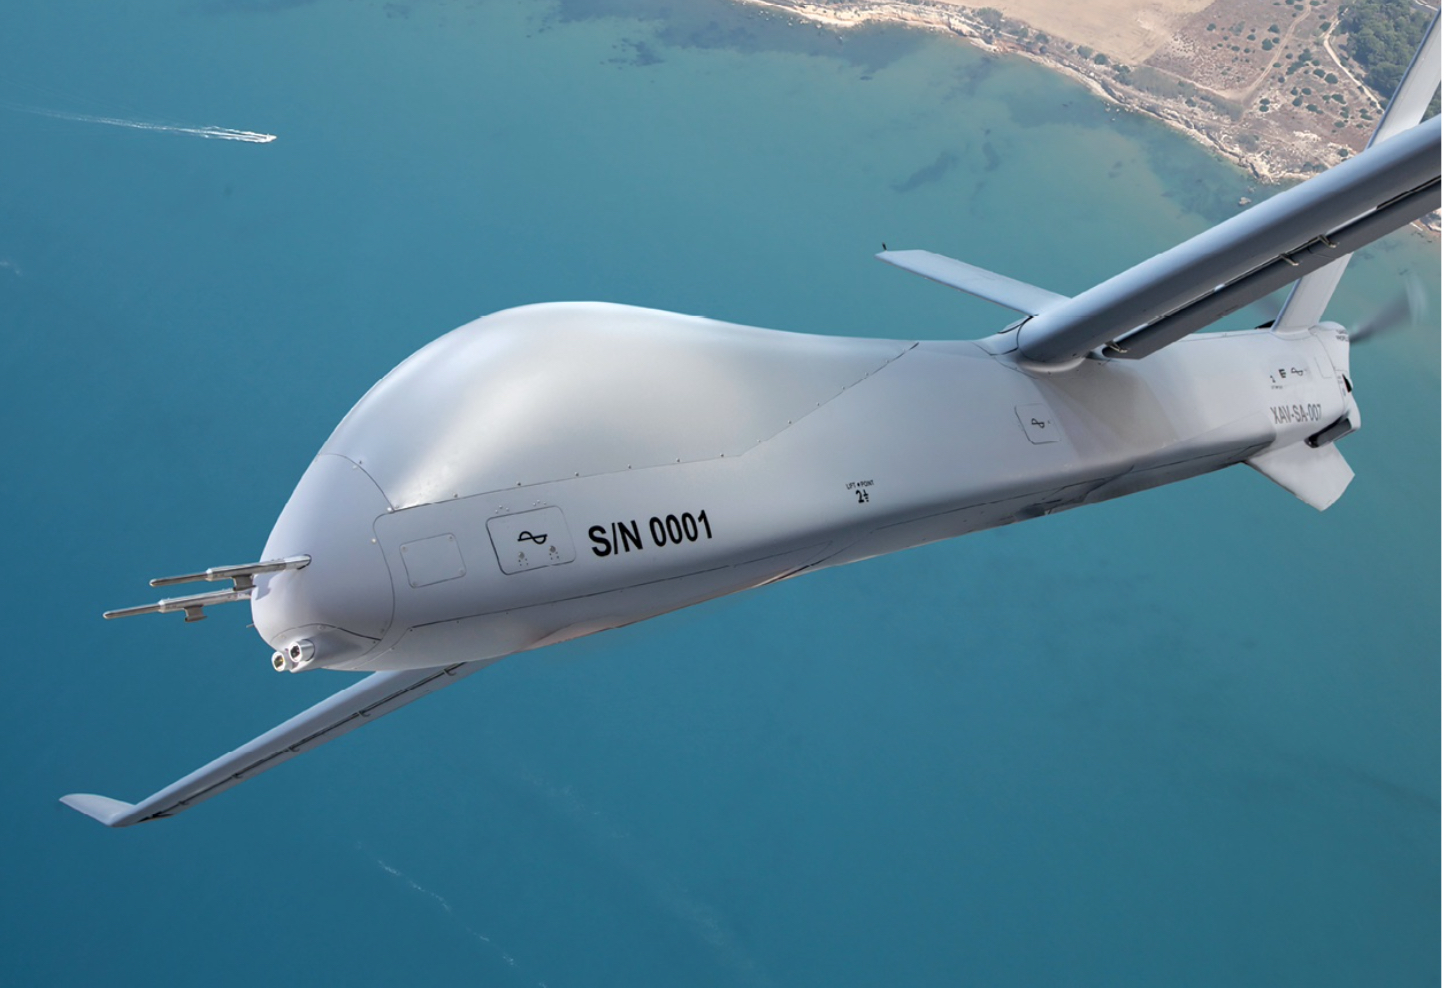 EMSA tests RPAS capability to provide maritime surveillance in  Mediterranean Sea - Unmanned airspace